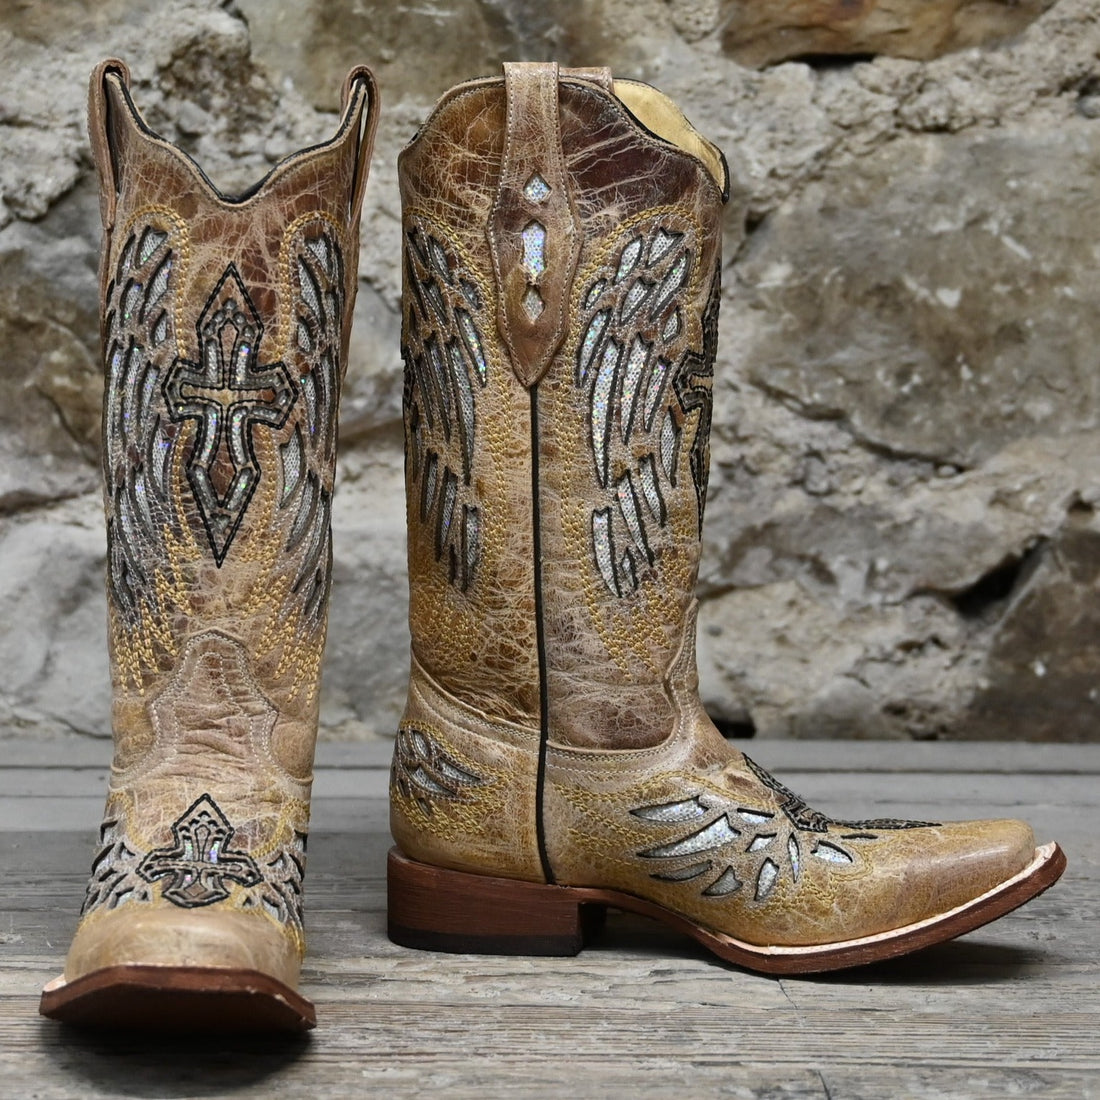 Med Sq Toe, 12&quot; Top, 1.25&quot; Roper Heel, Silver Glitter Inlay Fashion Boots view of front and side